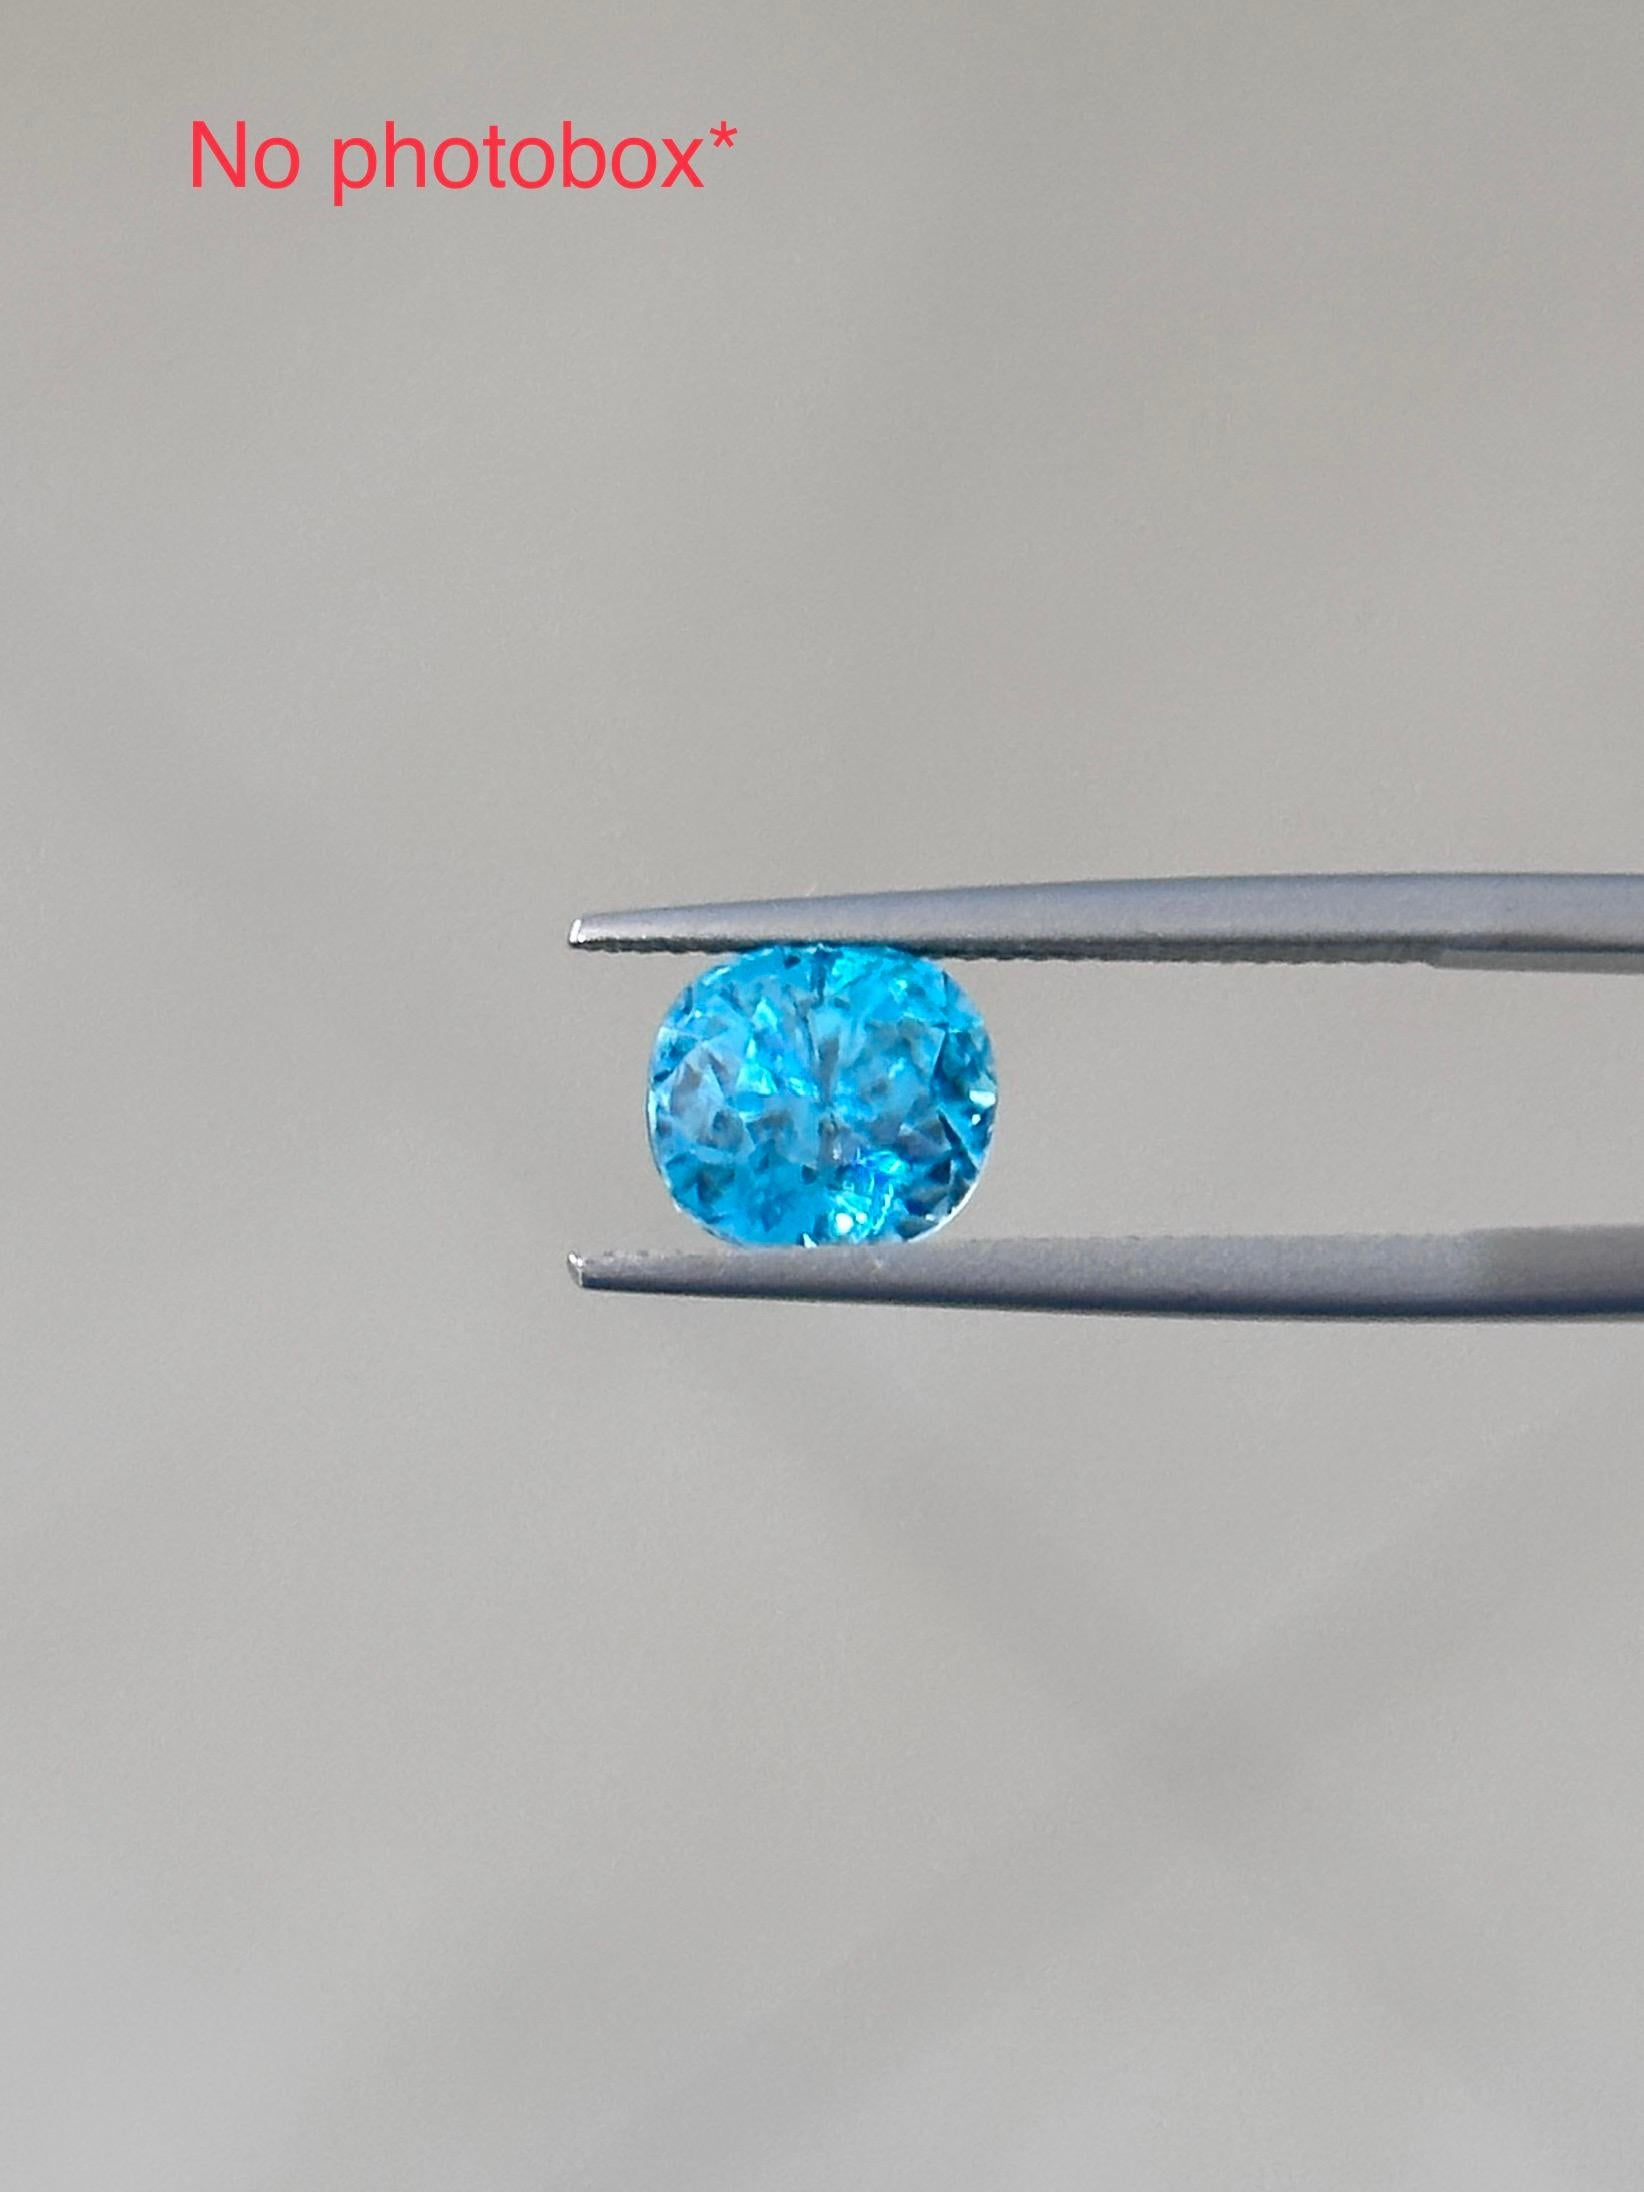 A beautiful sparkling Cushion-Cut 'Sky-Blue' Zircon from Ratanakiri, Cambodia.

Rare sparkling Blue Zircon is only found at one place in the world at Ratanakiri province in Northeast Cambodia. Blue Zircon in this vivid blue color is very rare